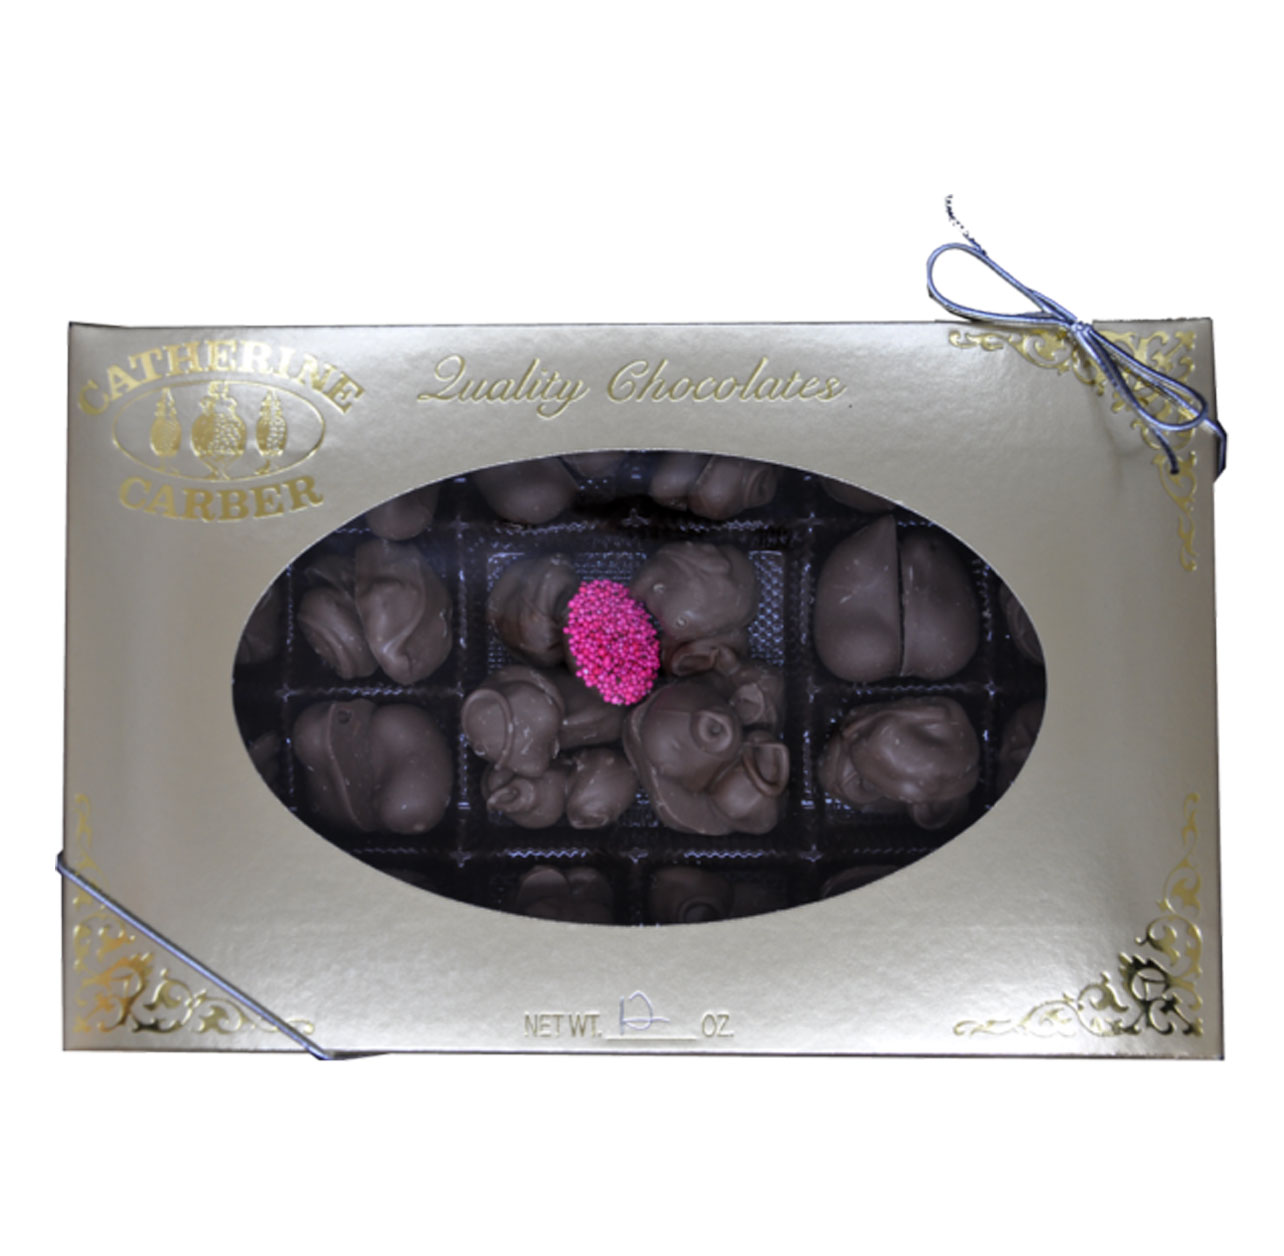  - Carber Chocolates - Delicious Hand-Made Chocolates - Assorted Chocolate Covered Nuts